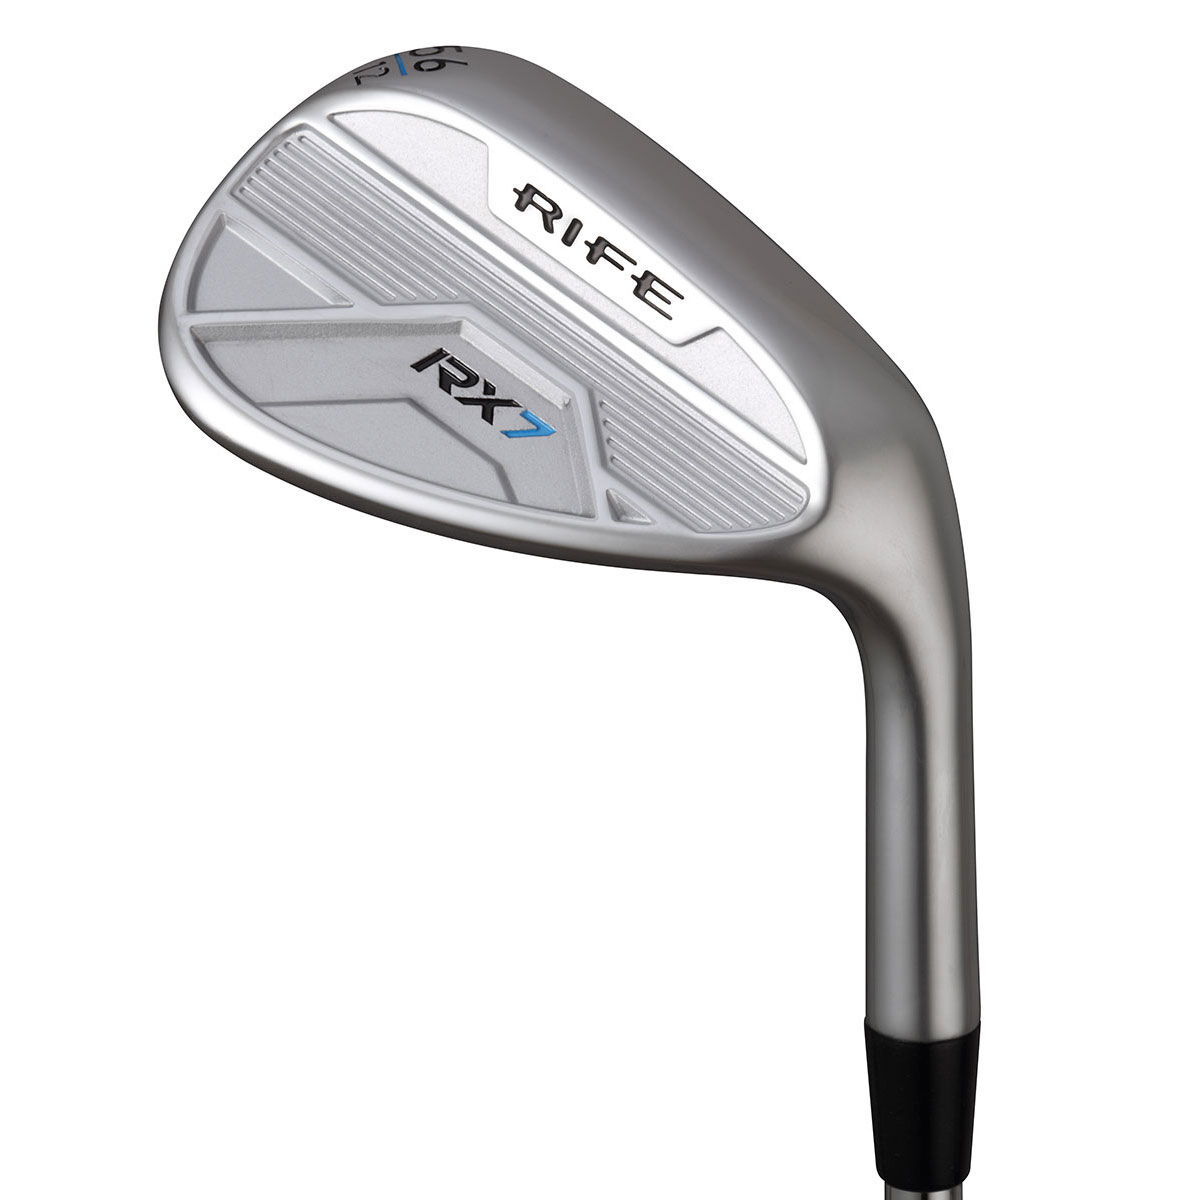 Rife Silver and Black Printed Rx7 Golf Wedge, Mens, Right Hand, Steel | American Golf, Size: 56˚, 56° von Rife